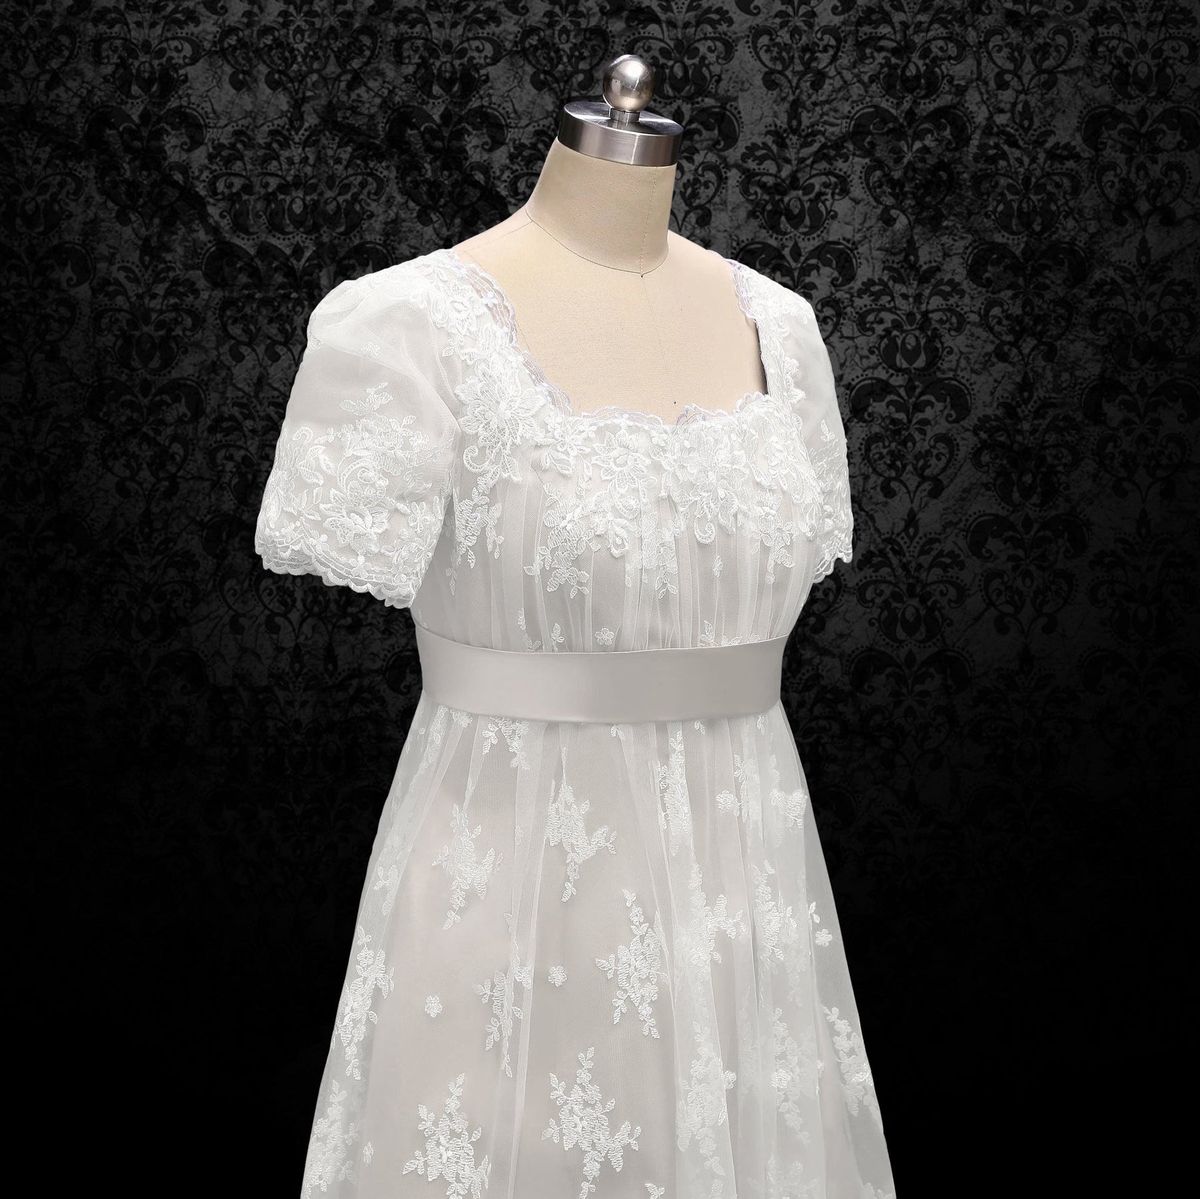 Wonderland By Lilian Plus Size 28 Prom Lace White A-line Dress on Queenly